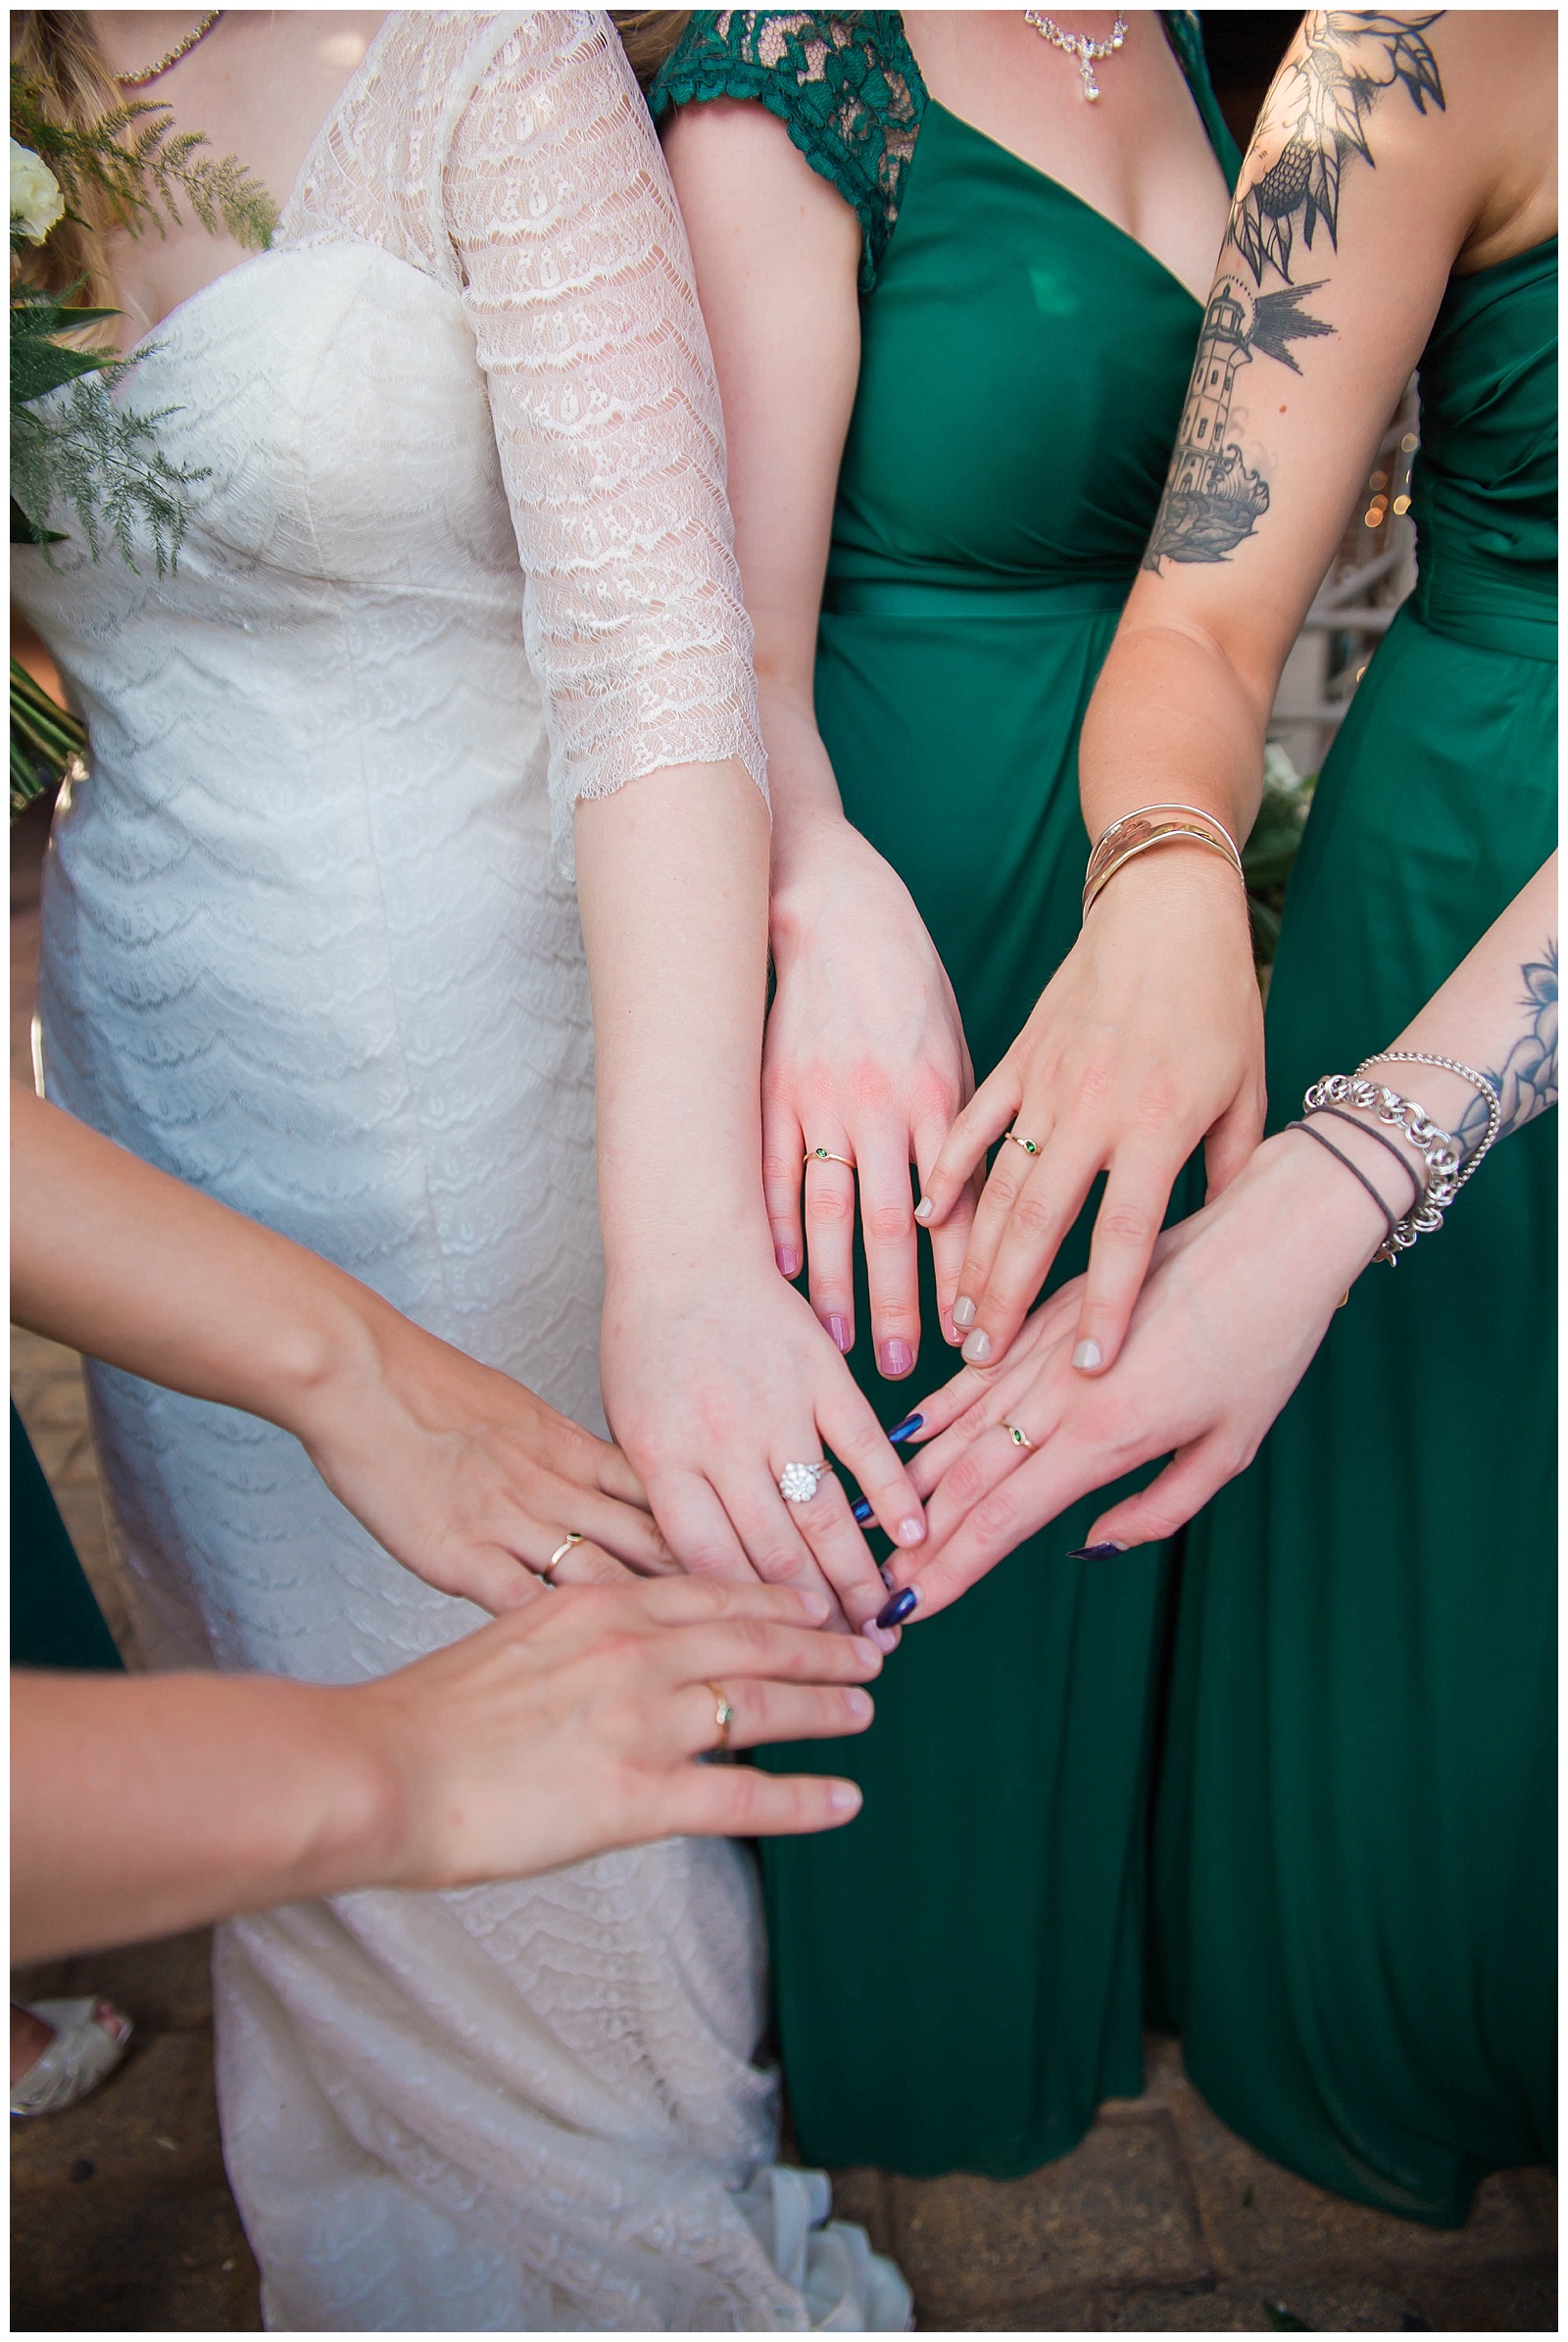  Haley hand-made a ring for each of her bridesmaids in her wedding colors!  